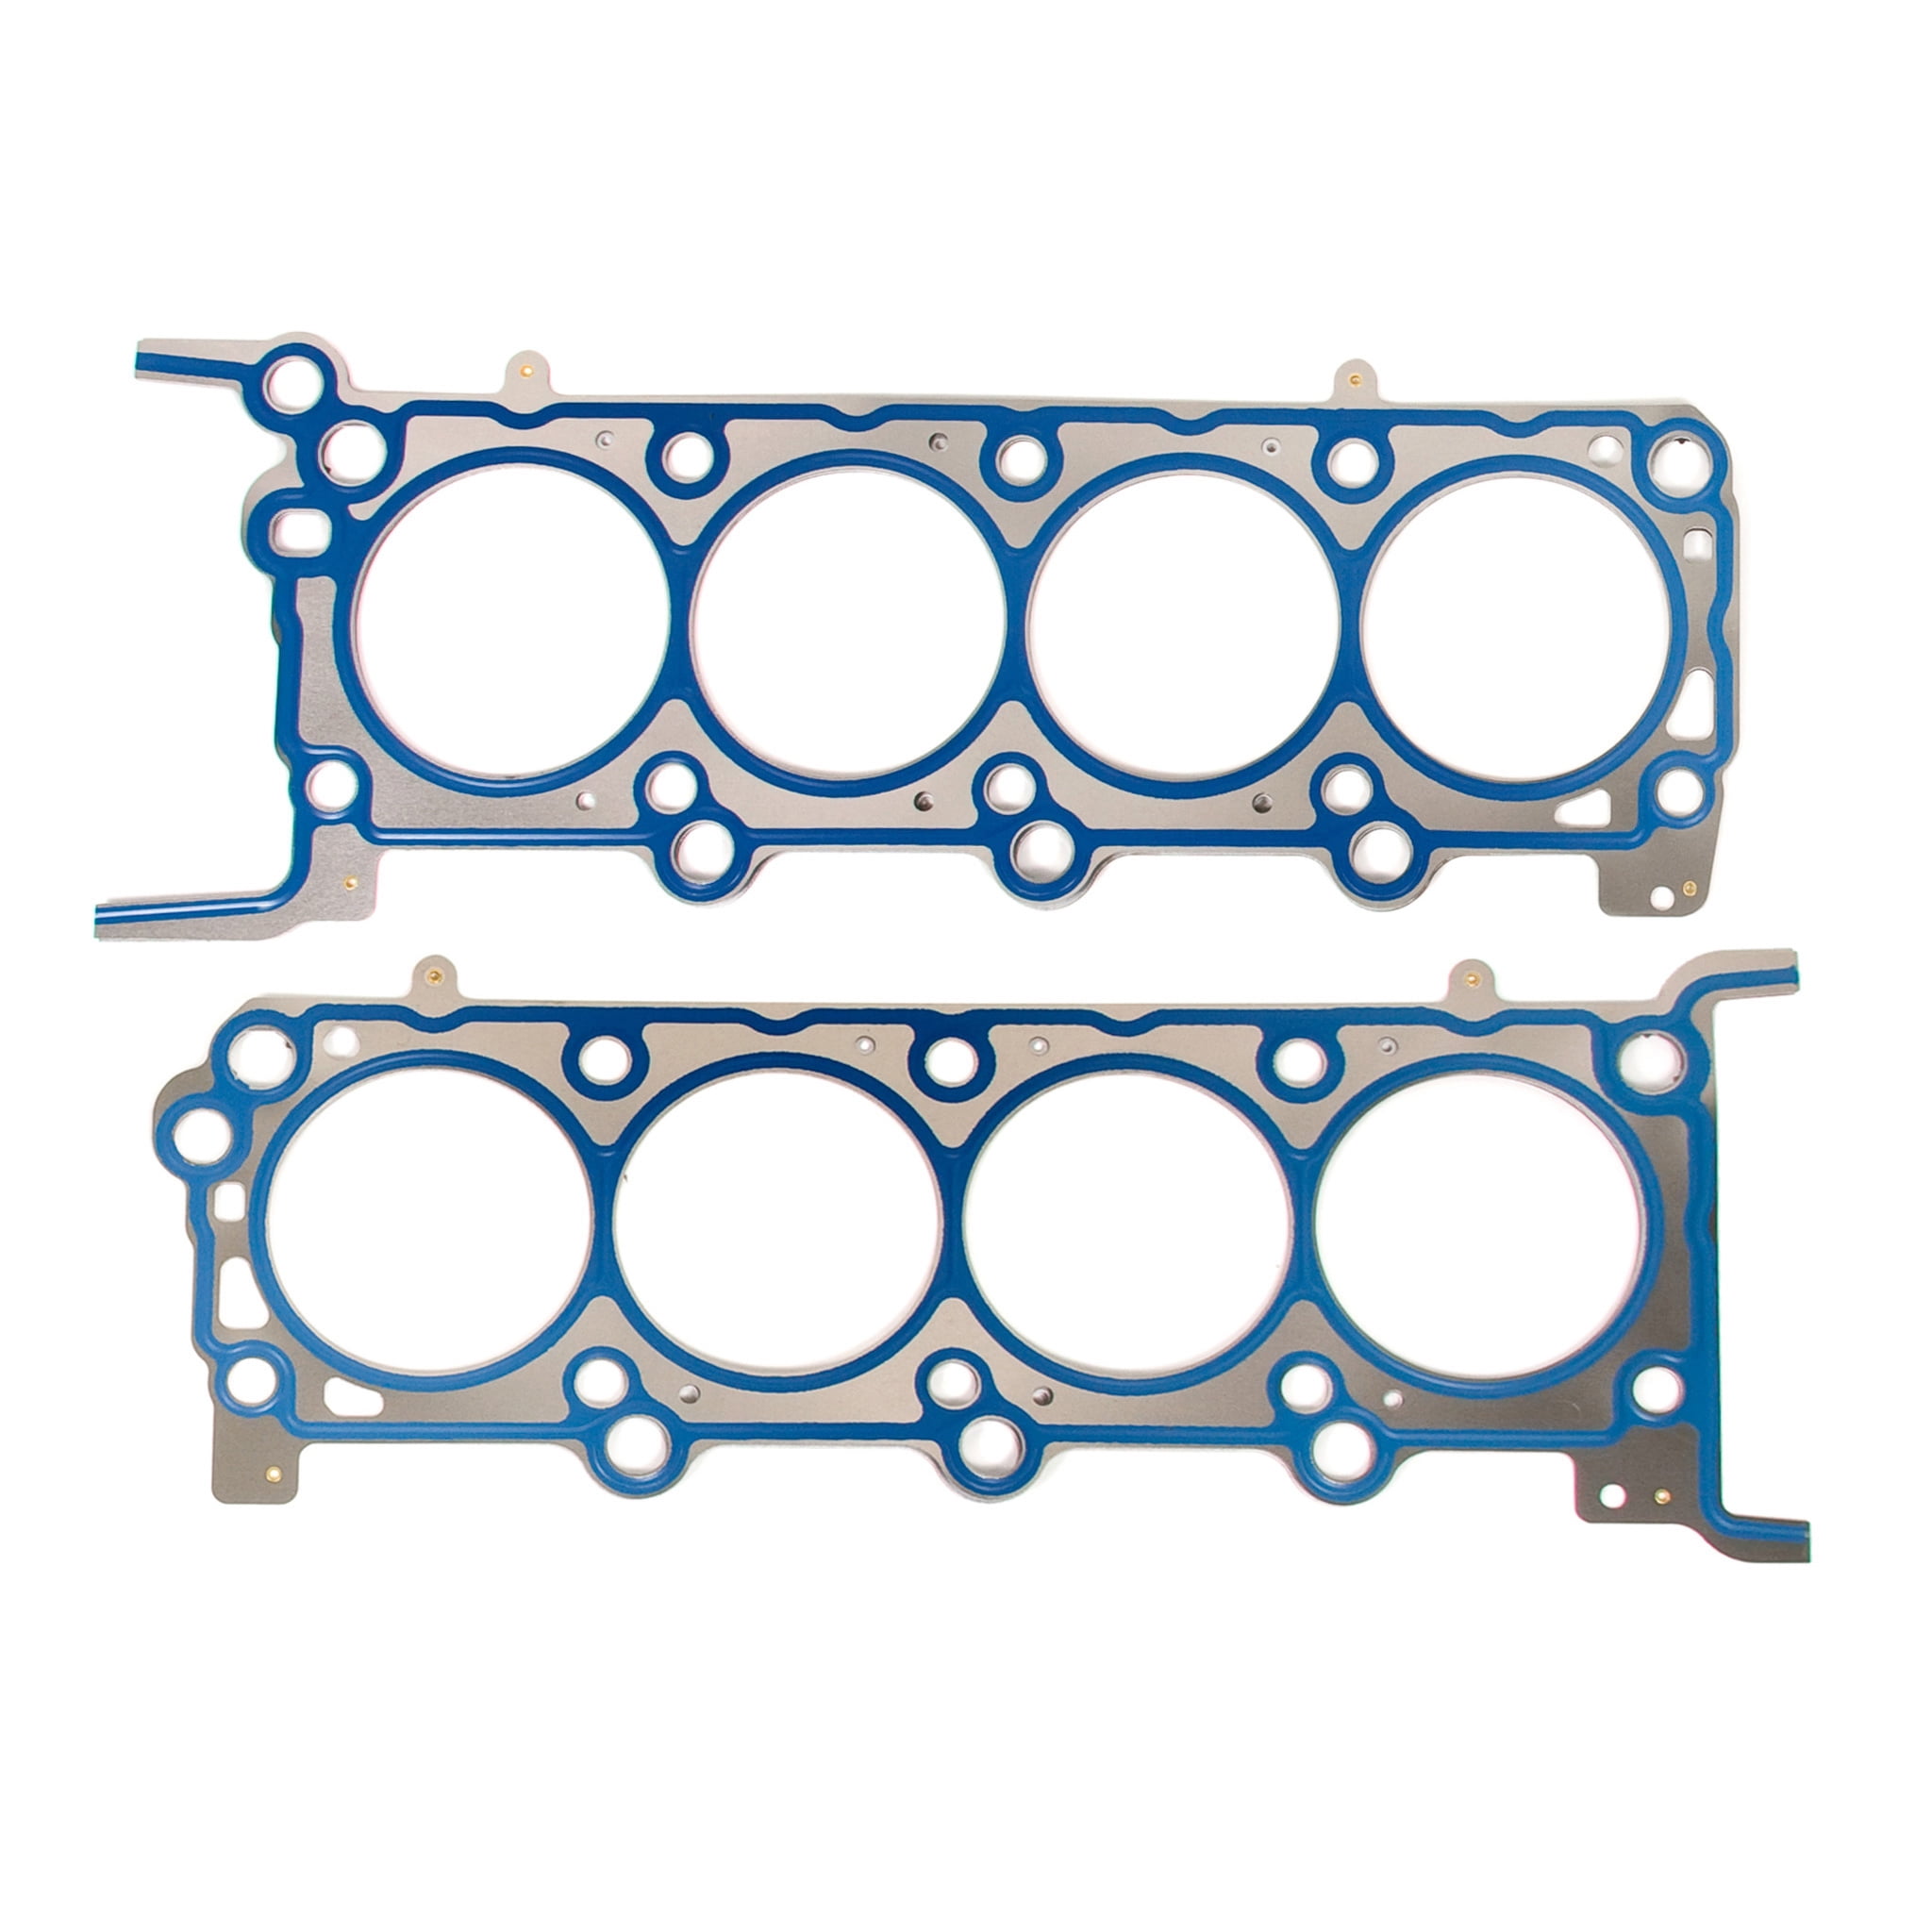 ECCPP Replacement for Head Gasket Set for 2007-2012 Ford